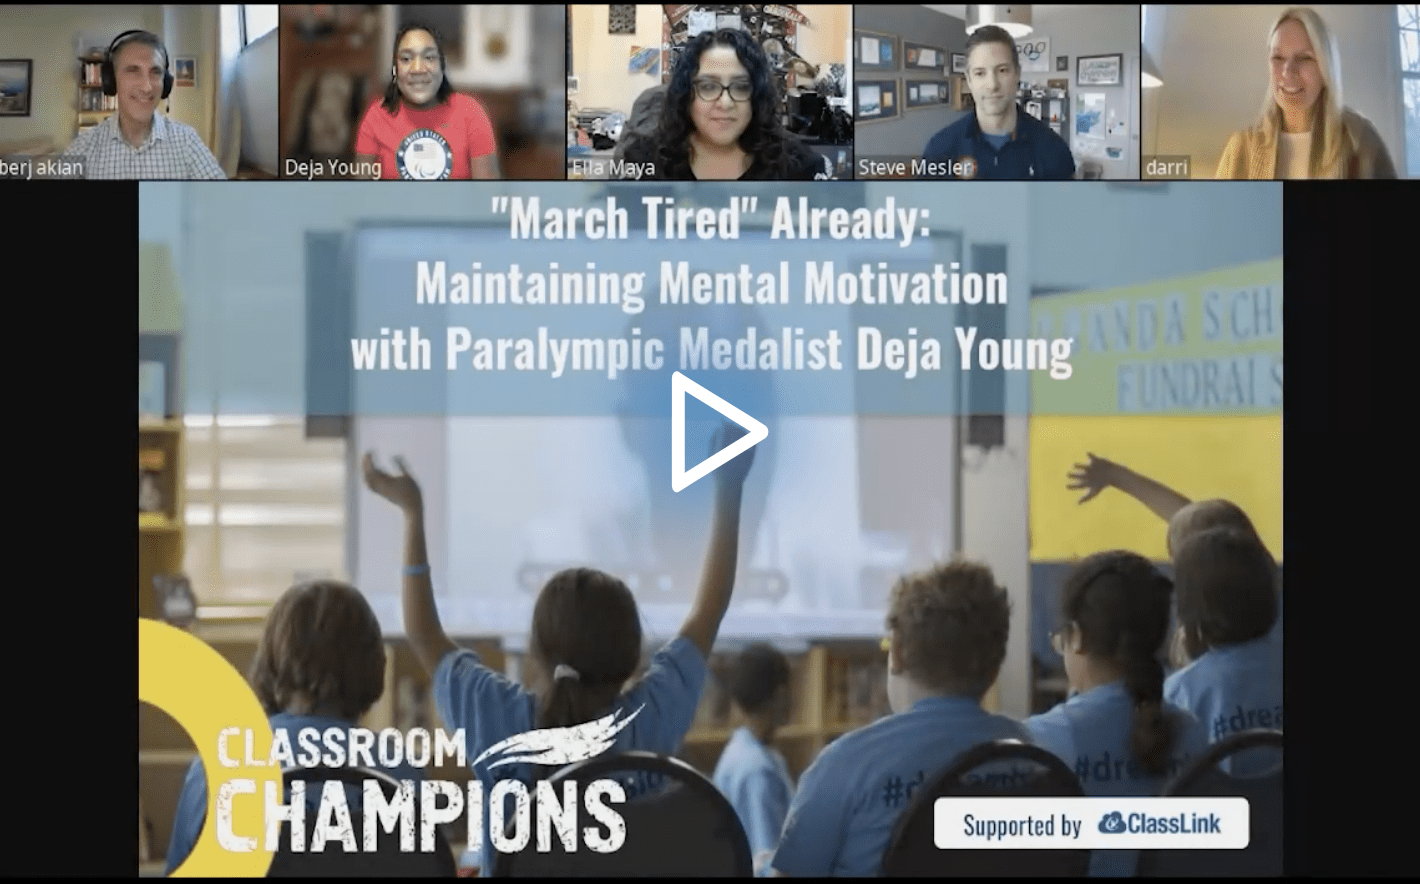 “March Tired” Already: Maintaining Mental Motivation with Paralympic Medalist Deja Young edLeader Panel recording link